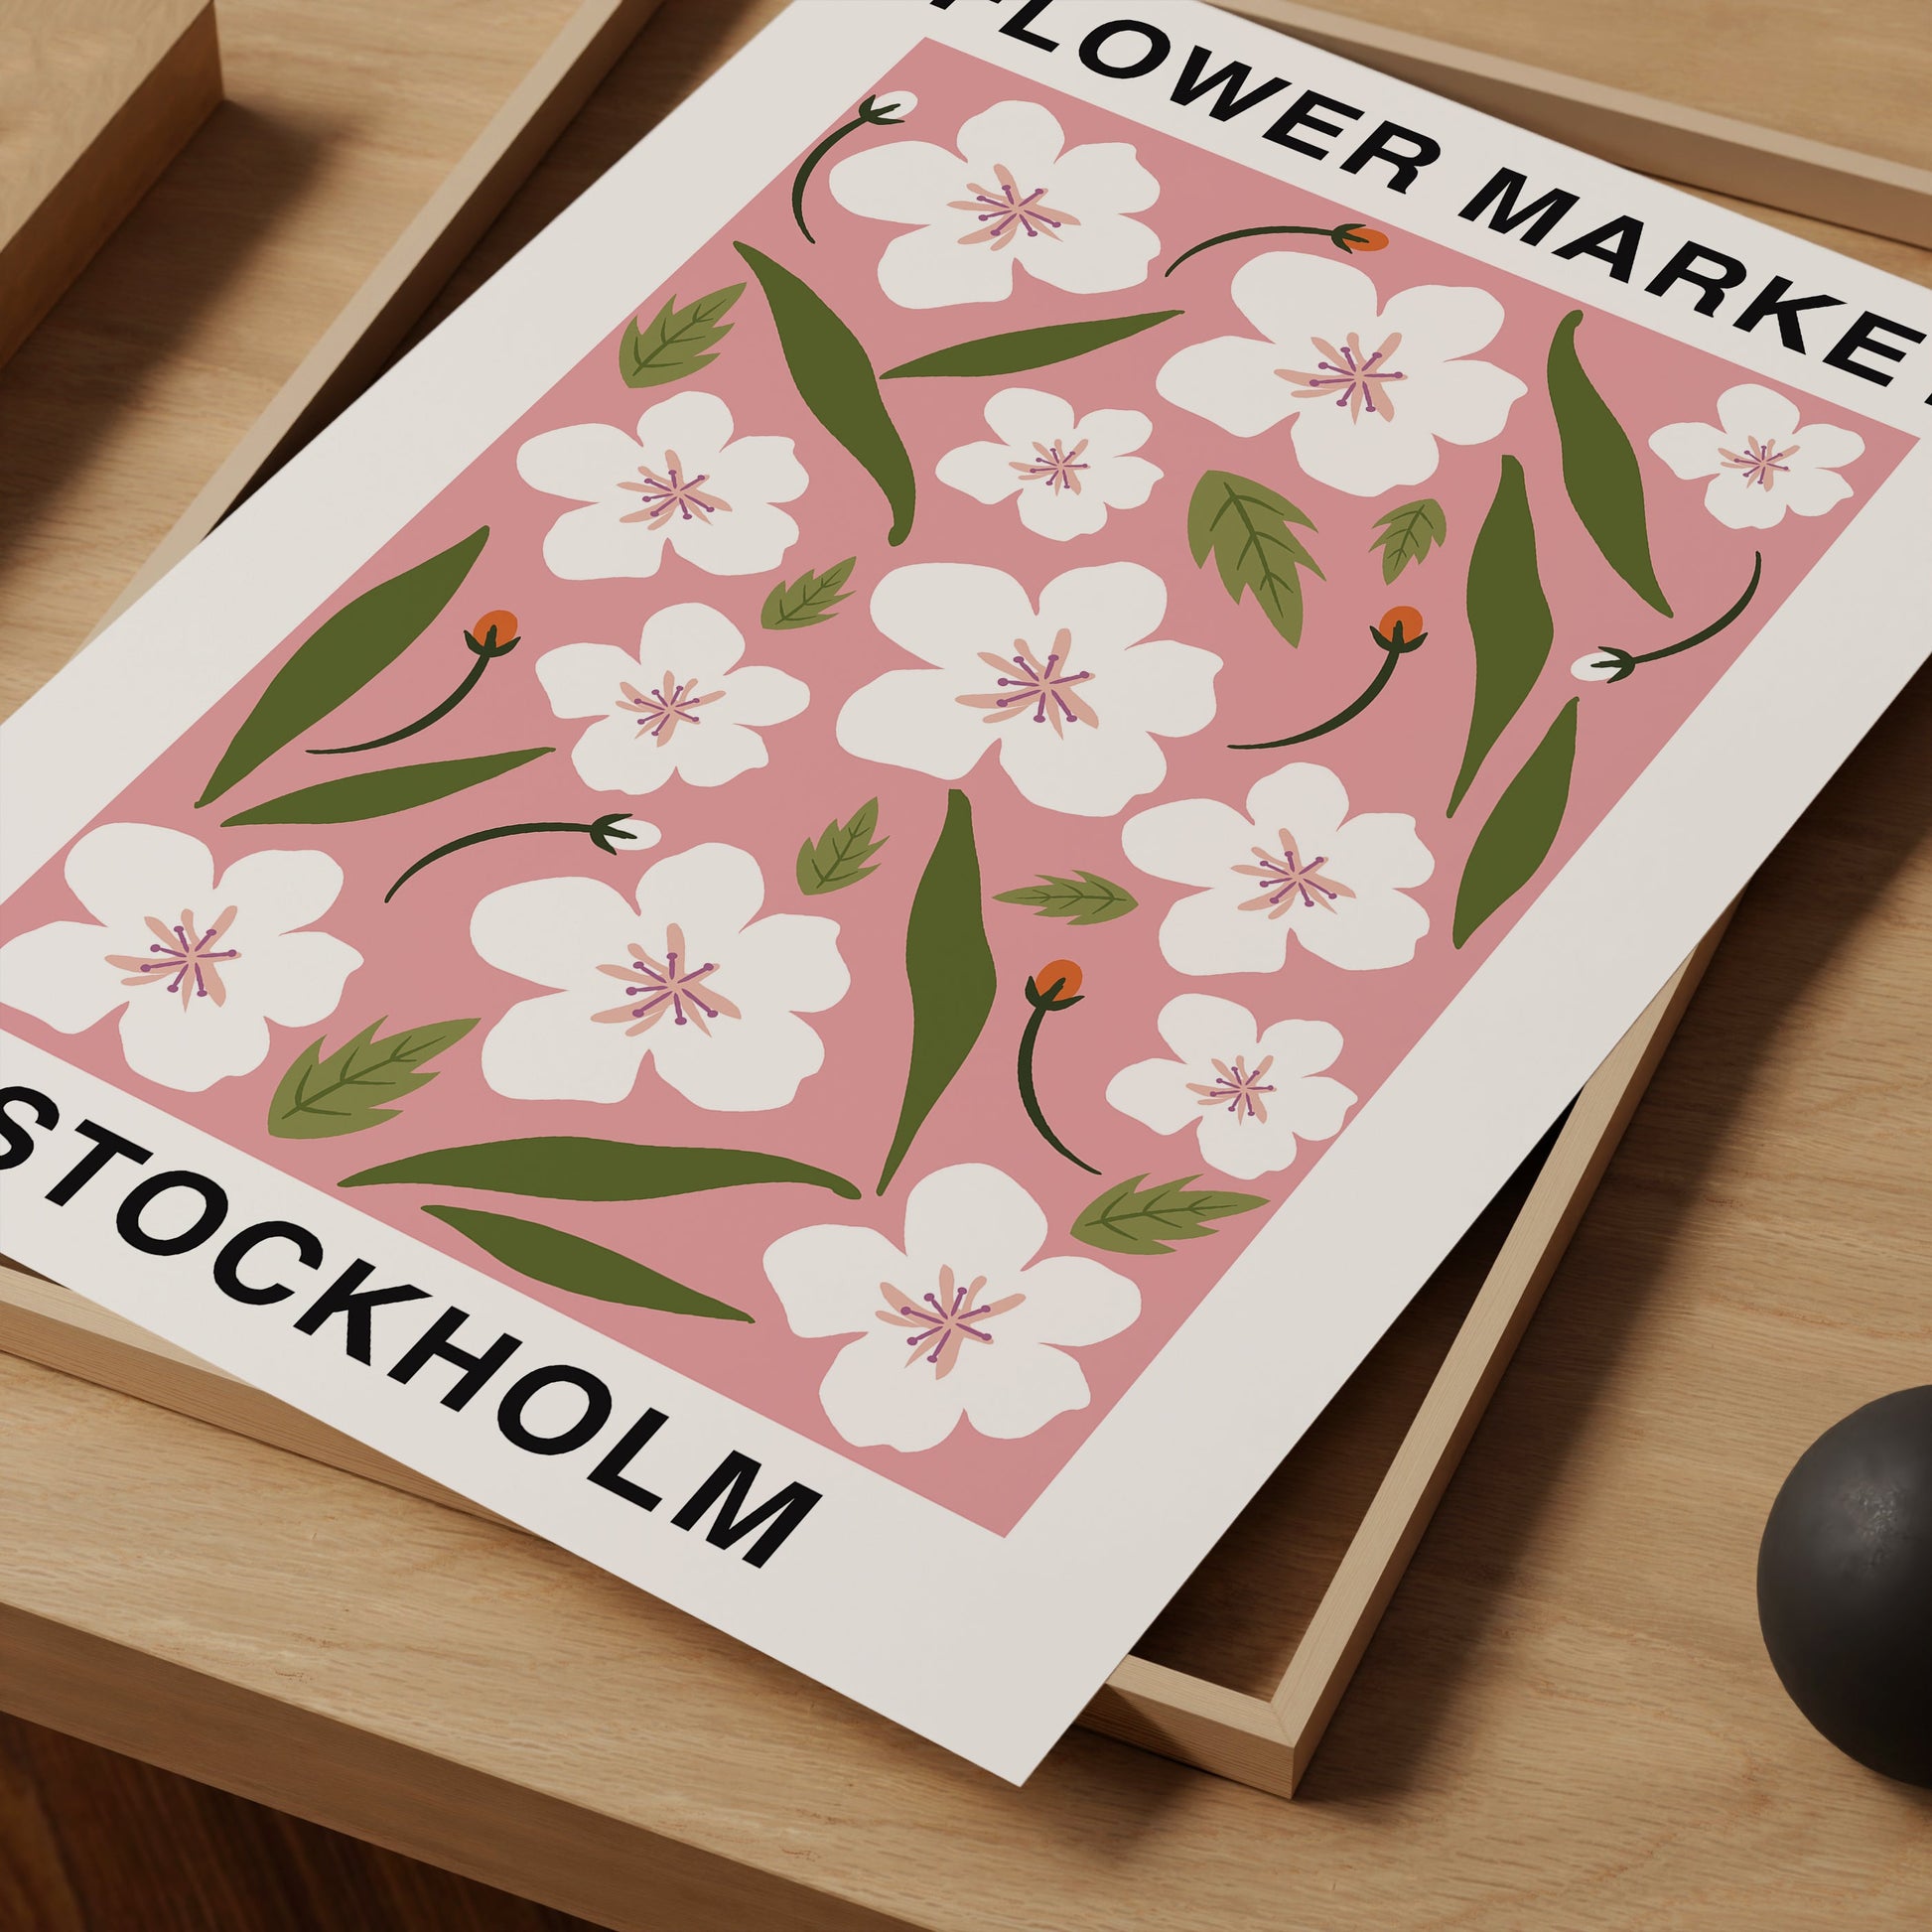 a flower make stockholm poster on a desk next to a computer mouse